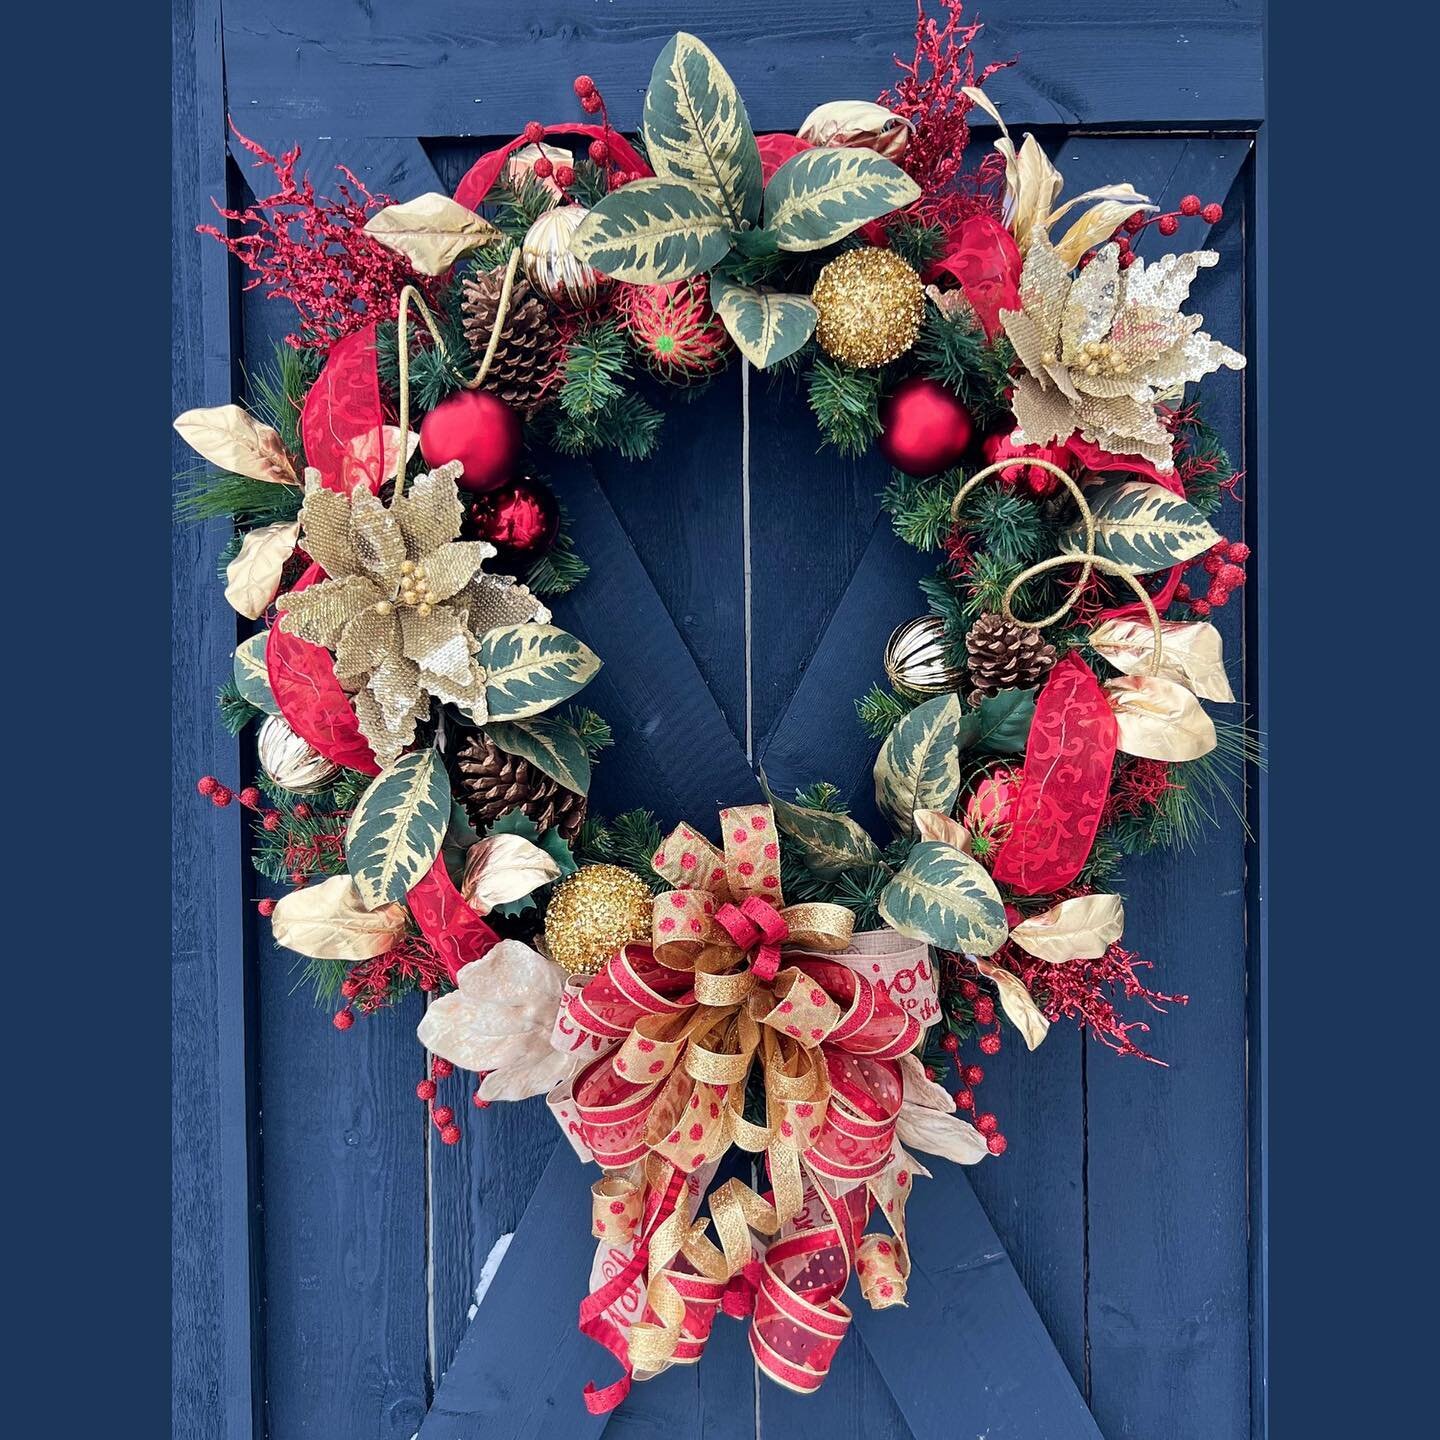 Meet the Makers - Wholly Handmade December 10/11

@pinklimewreaths 

Hello I'm Lainy of PinkLimeWreaths! I'm a wreath designer that has 12yrs experience working with florals and greenery. I love creating wreaths in all different styles be it traditio